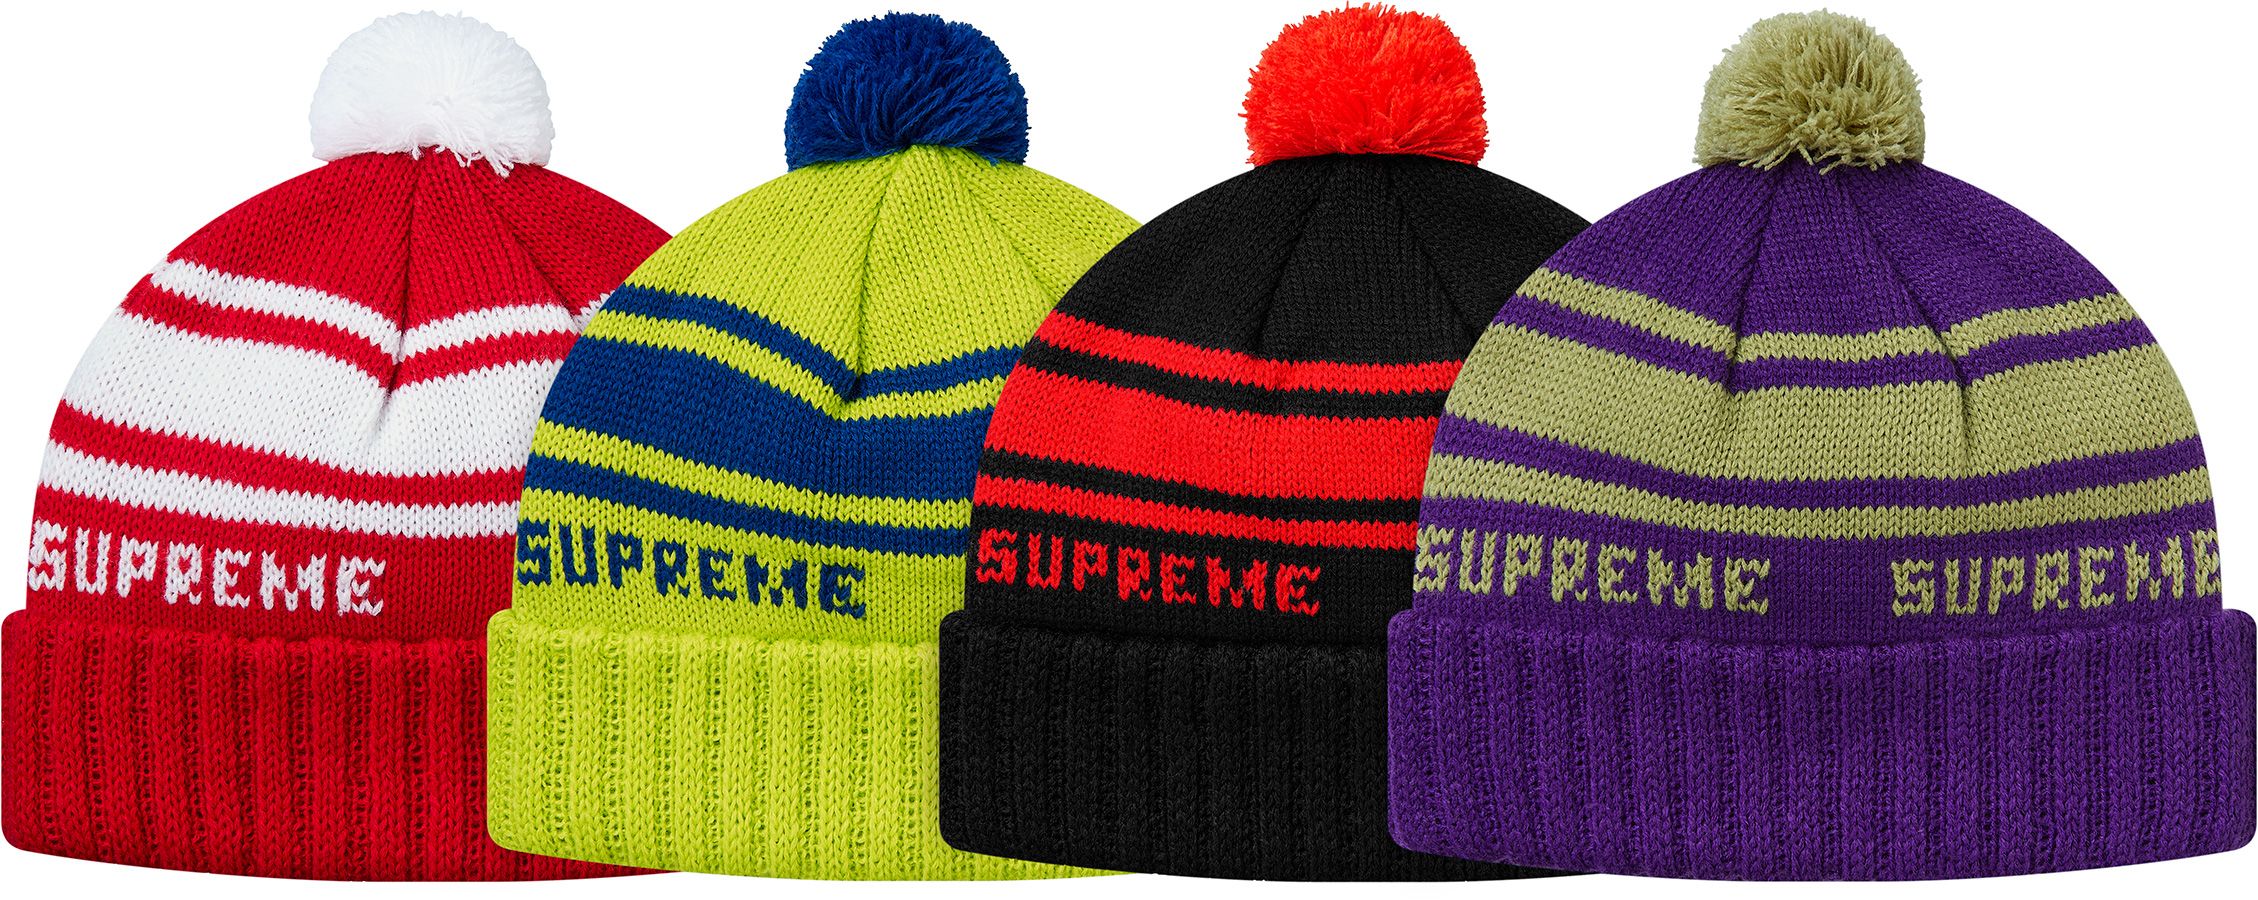 Rose Jacquard Beanie - Fall/Winter 2018 Preview – Supreme